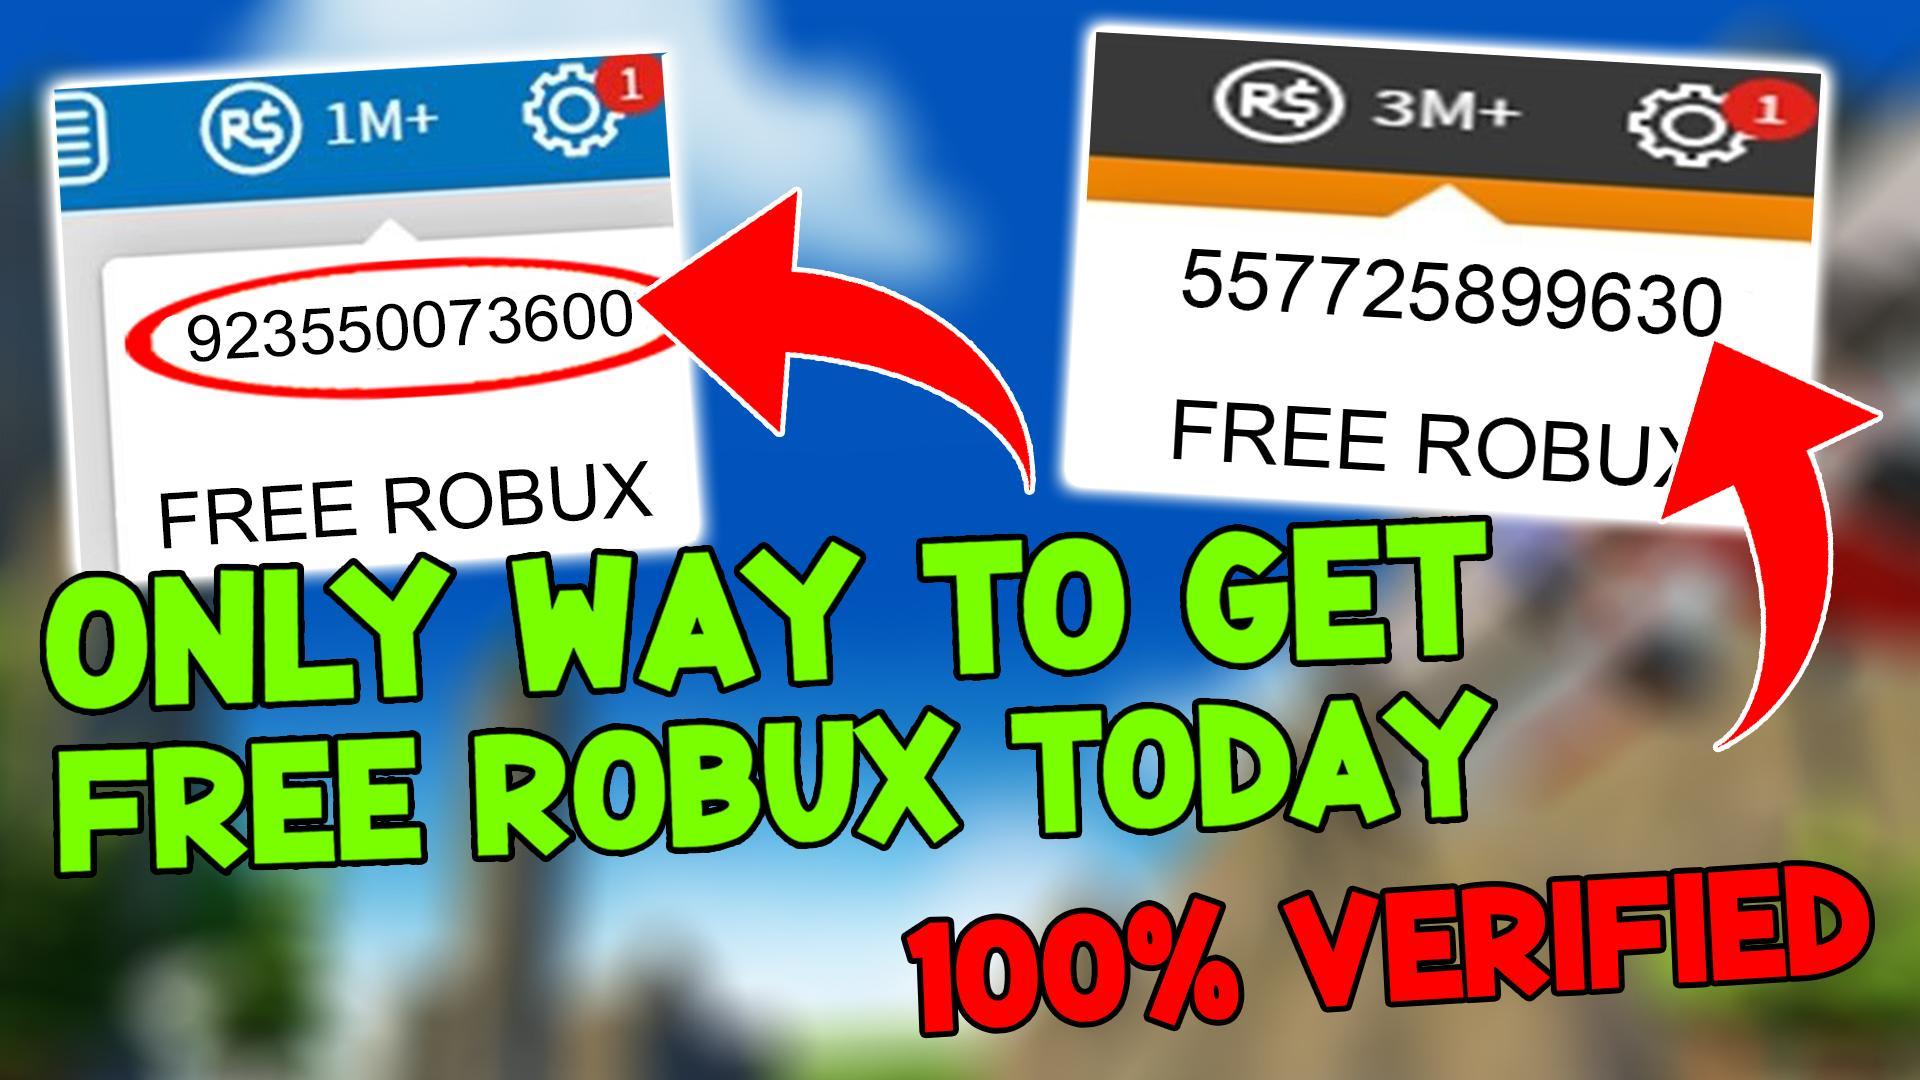 Start Getting Daily Robuxall For Free 2019 For Android - daily robux com